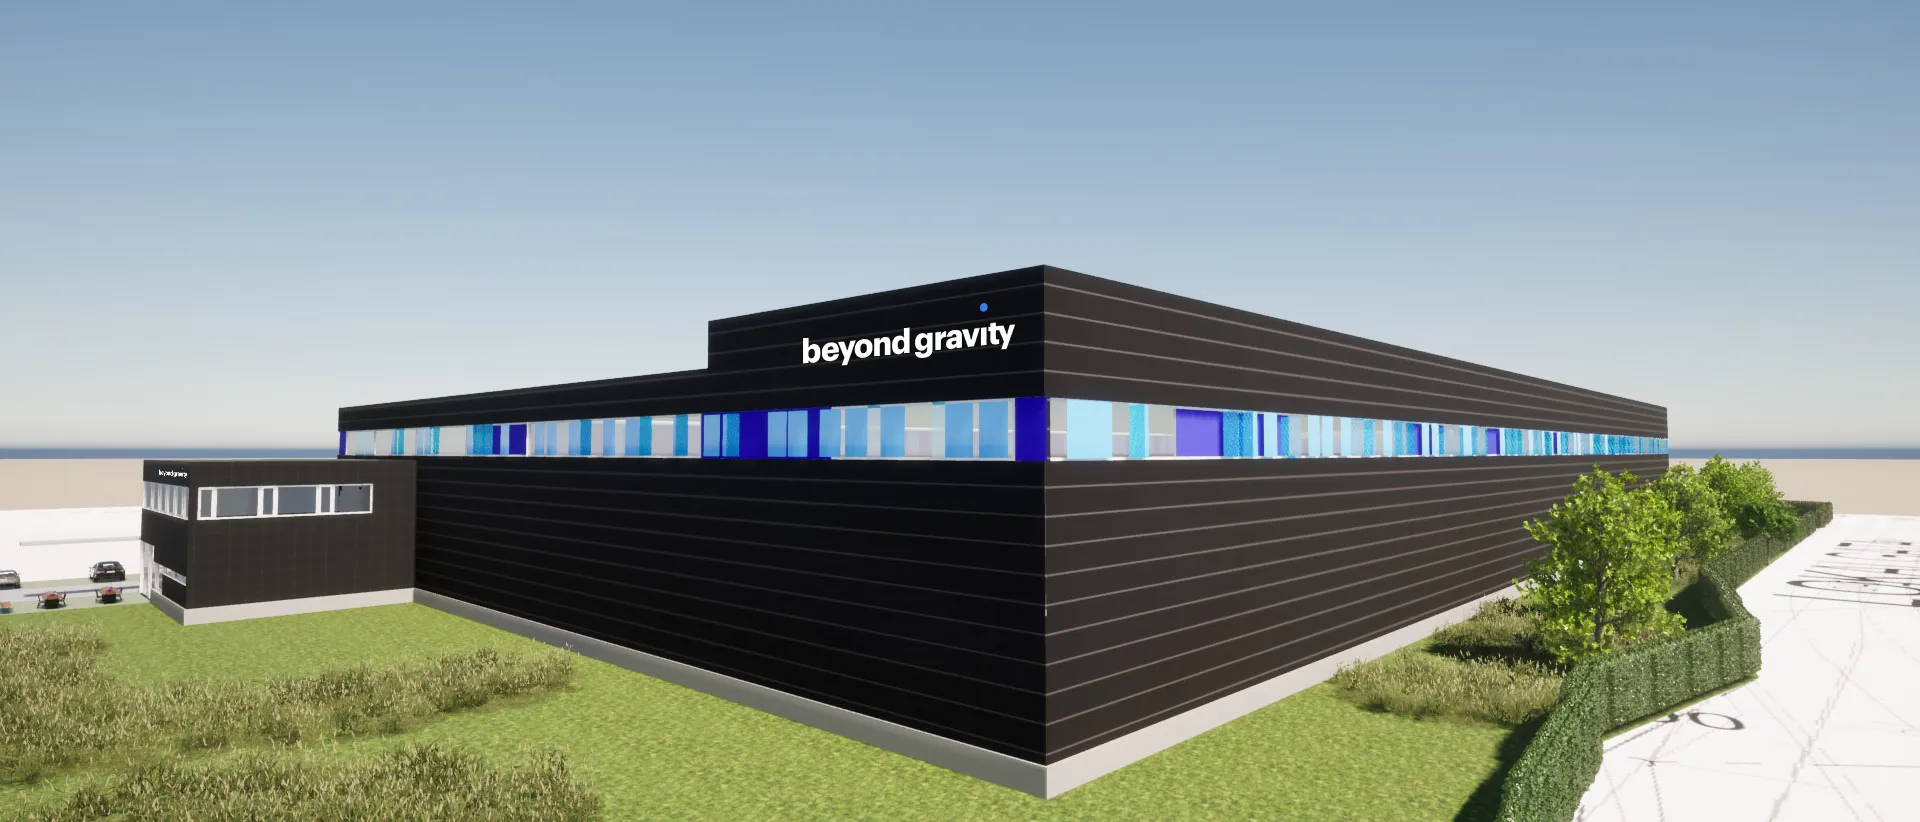 Beyond Gravity (formerly RUAG Space) is ramping up its production of satellite dispensers in Linköping, Sweden, with the construction of a new facility. Completion of the new facility is scheduled for 2023. (Visualization of the future production facility). © Aspehof Fastigheter, Beyond Gravity.